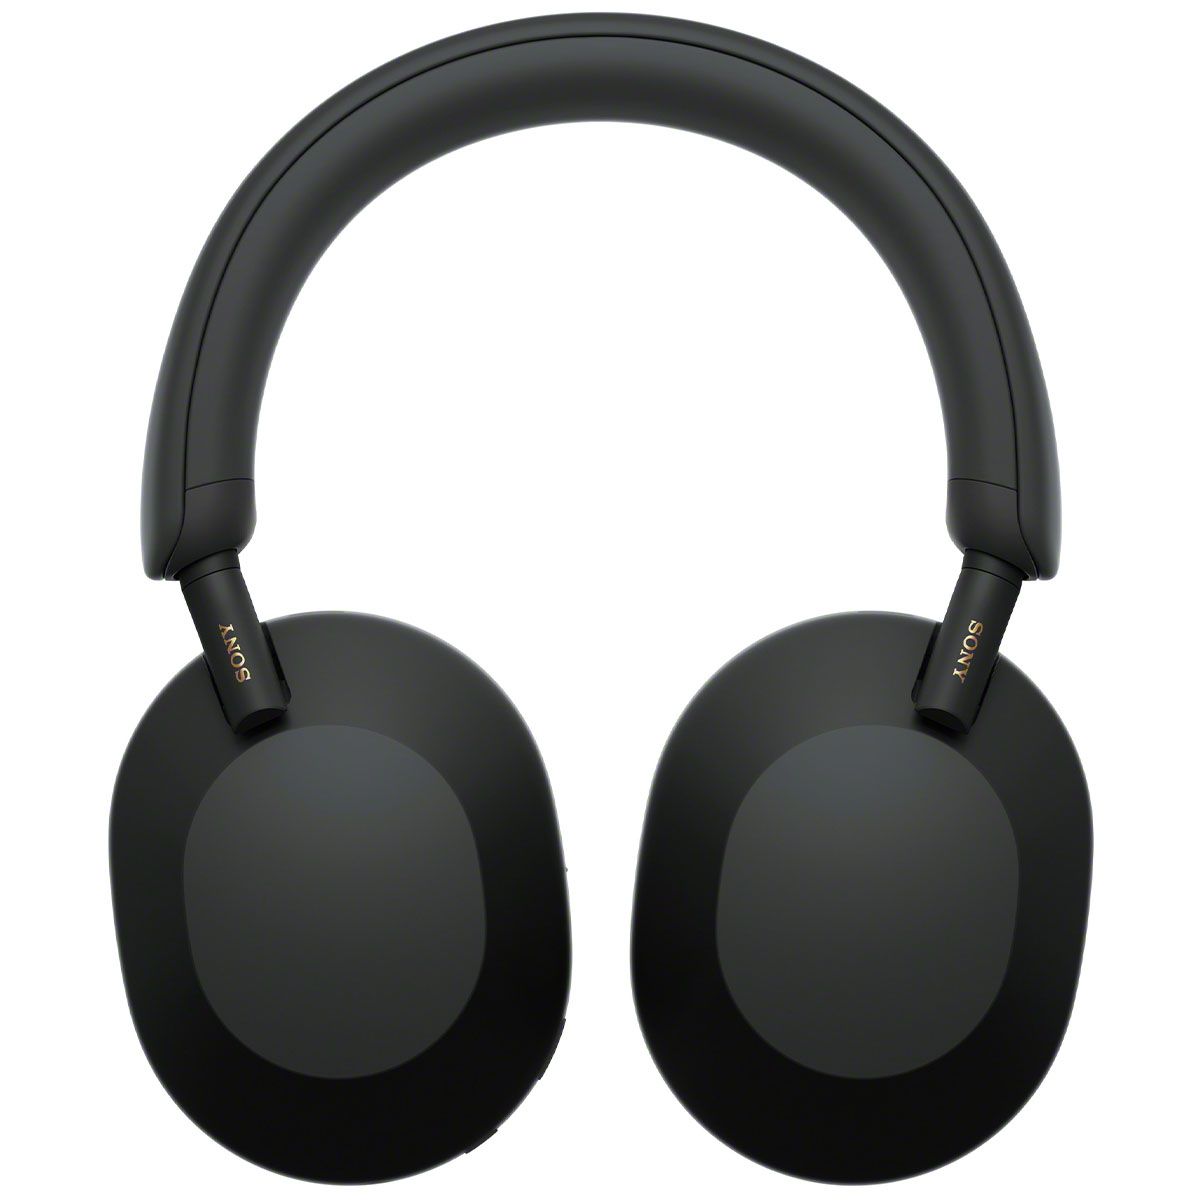 Sony WH-1000XM5 Wireless Over-Ear Headphones - Black - Flat View